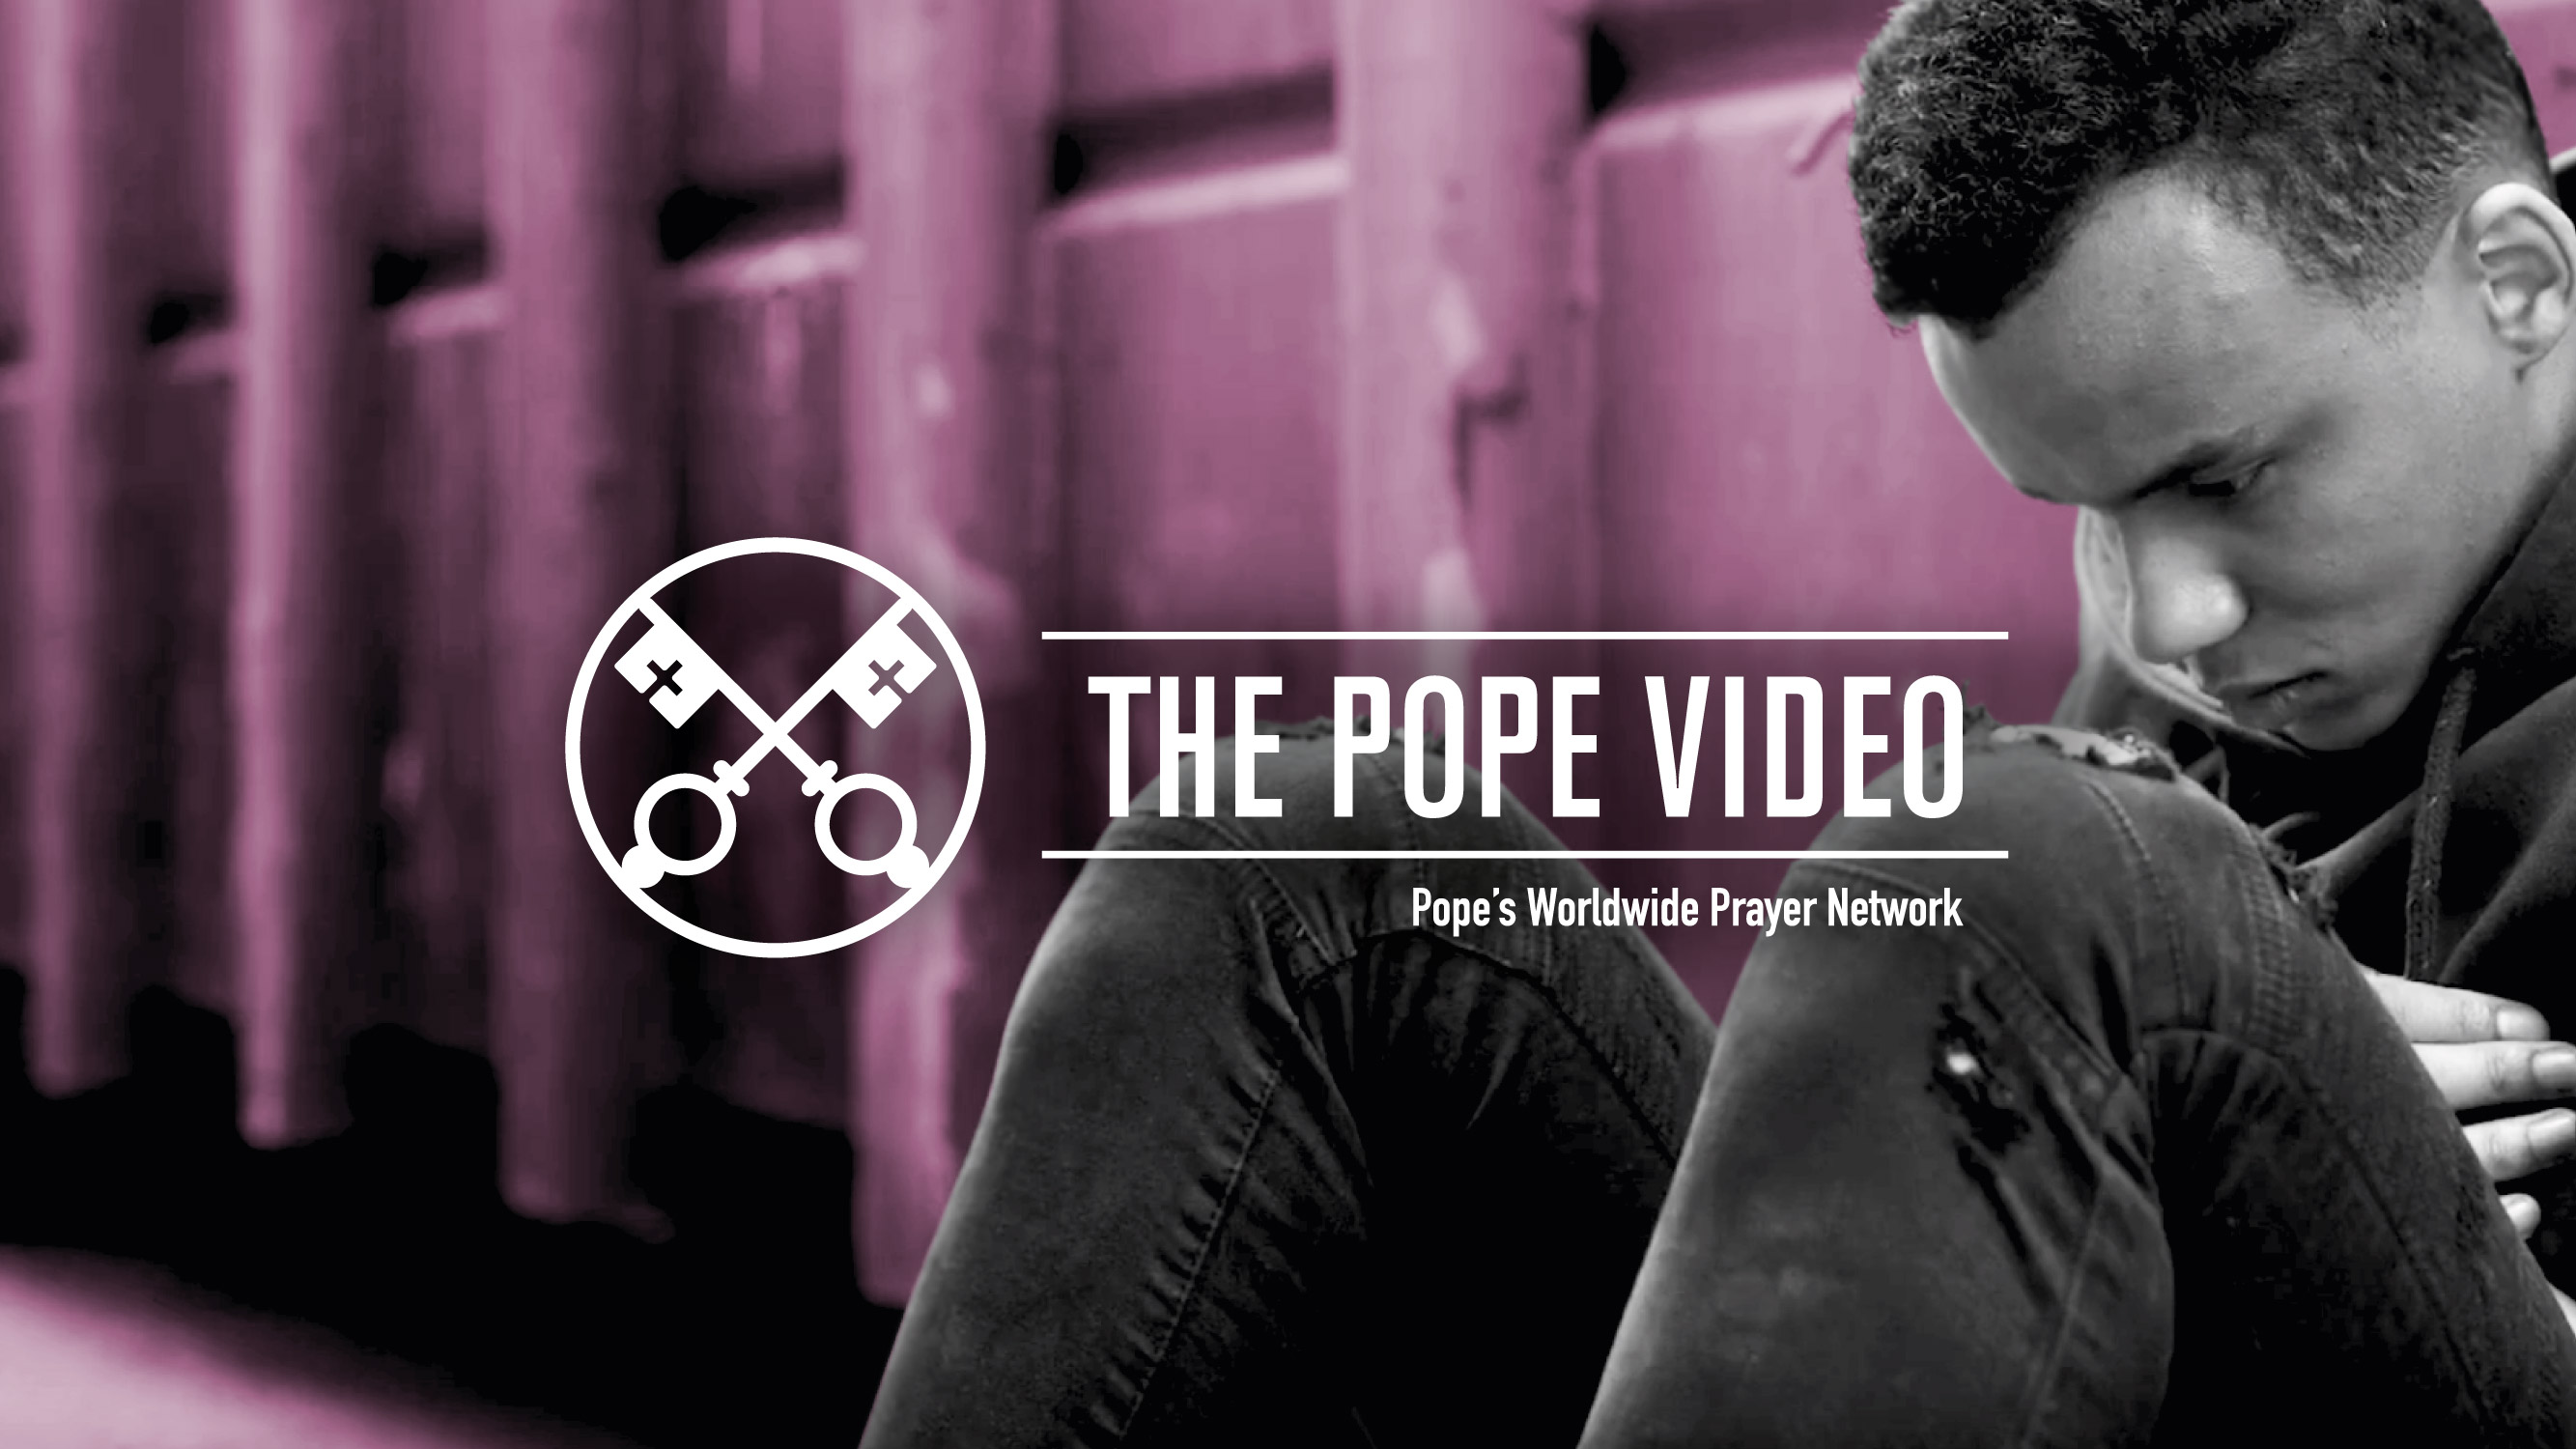 The Pope Video April 2020 - Liberation from addictions (Official Image)